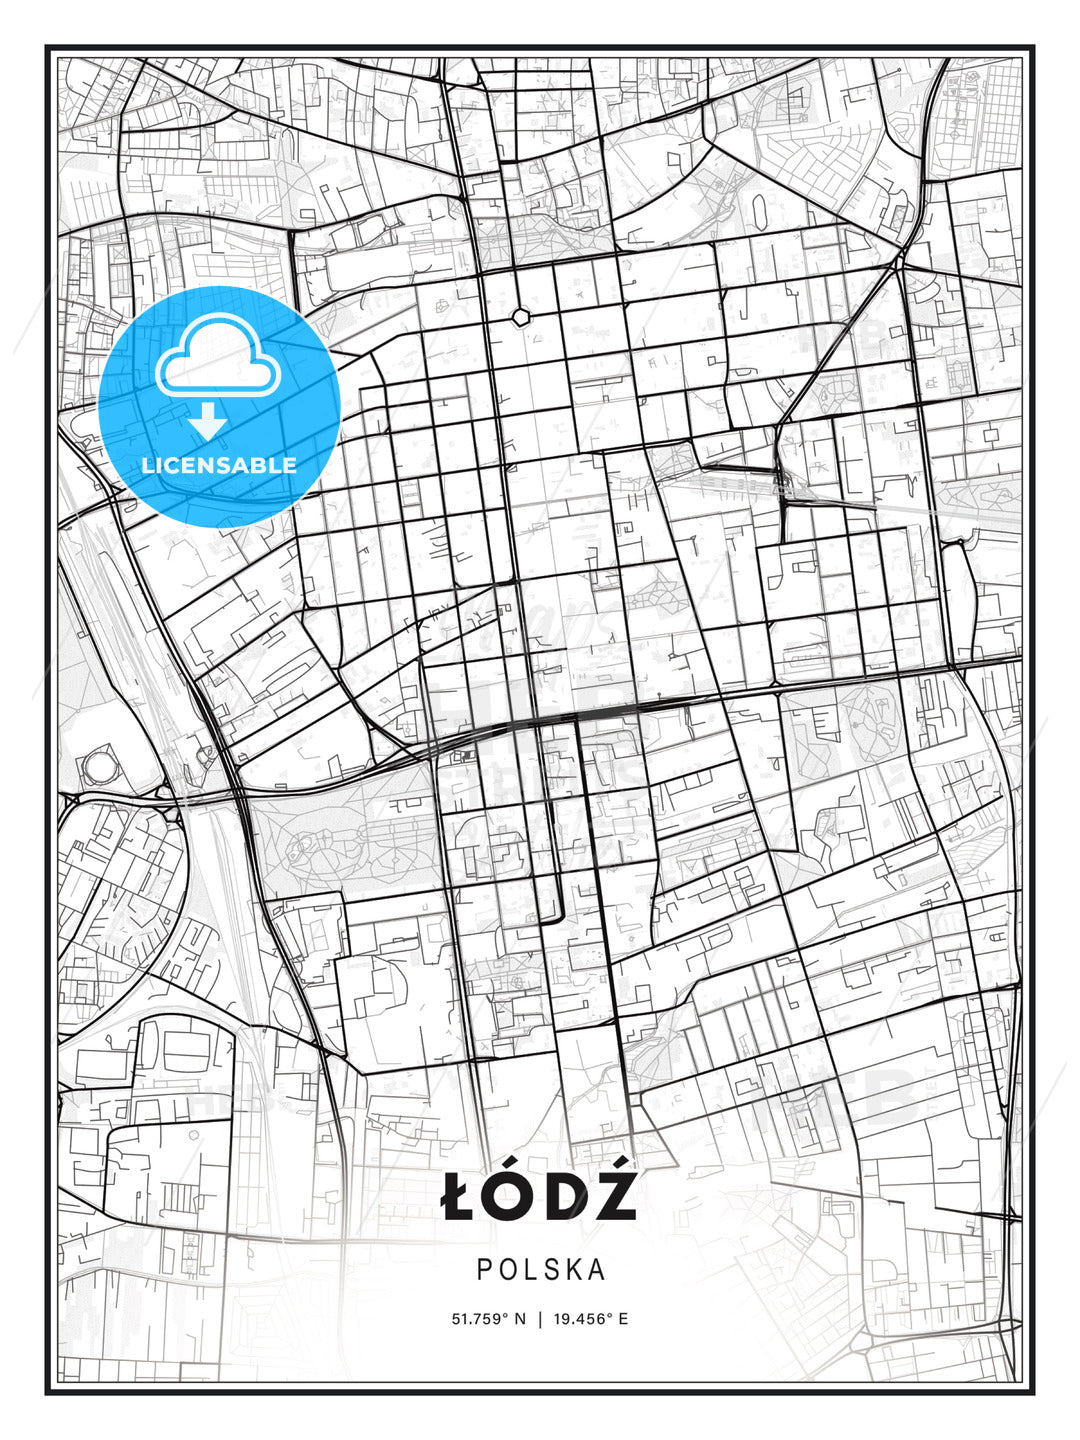 Łódź, Poland, Modern Print Template in Various Formats - HEBSTREITS Sketches